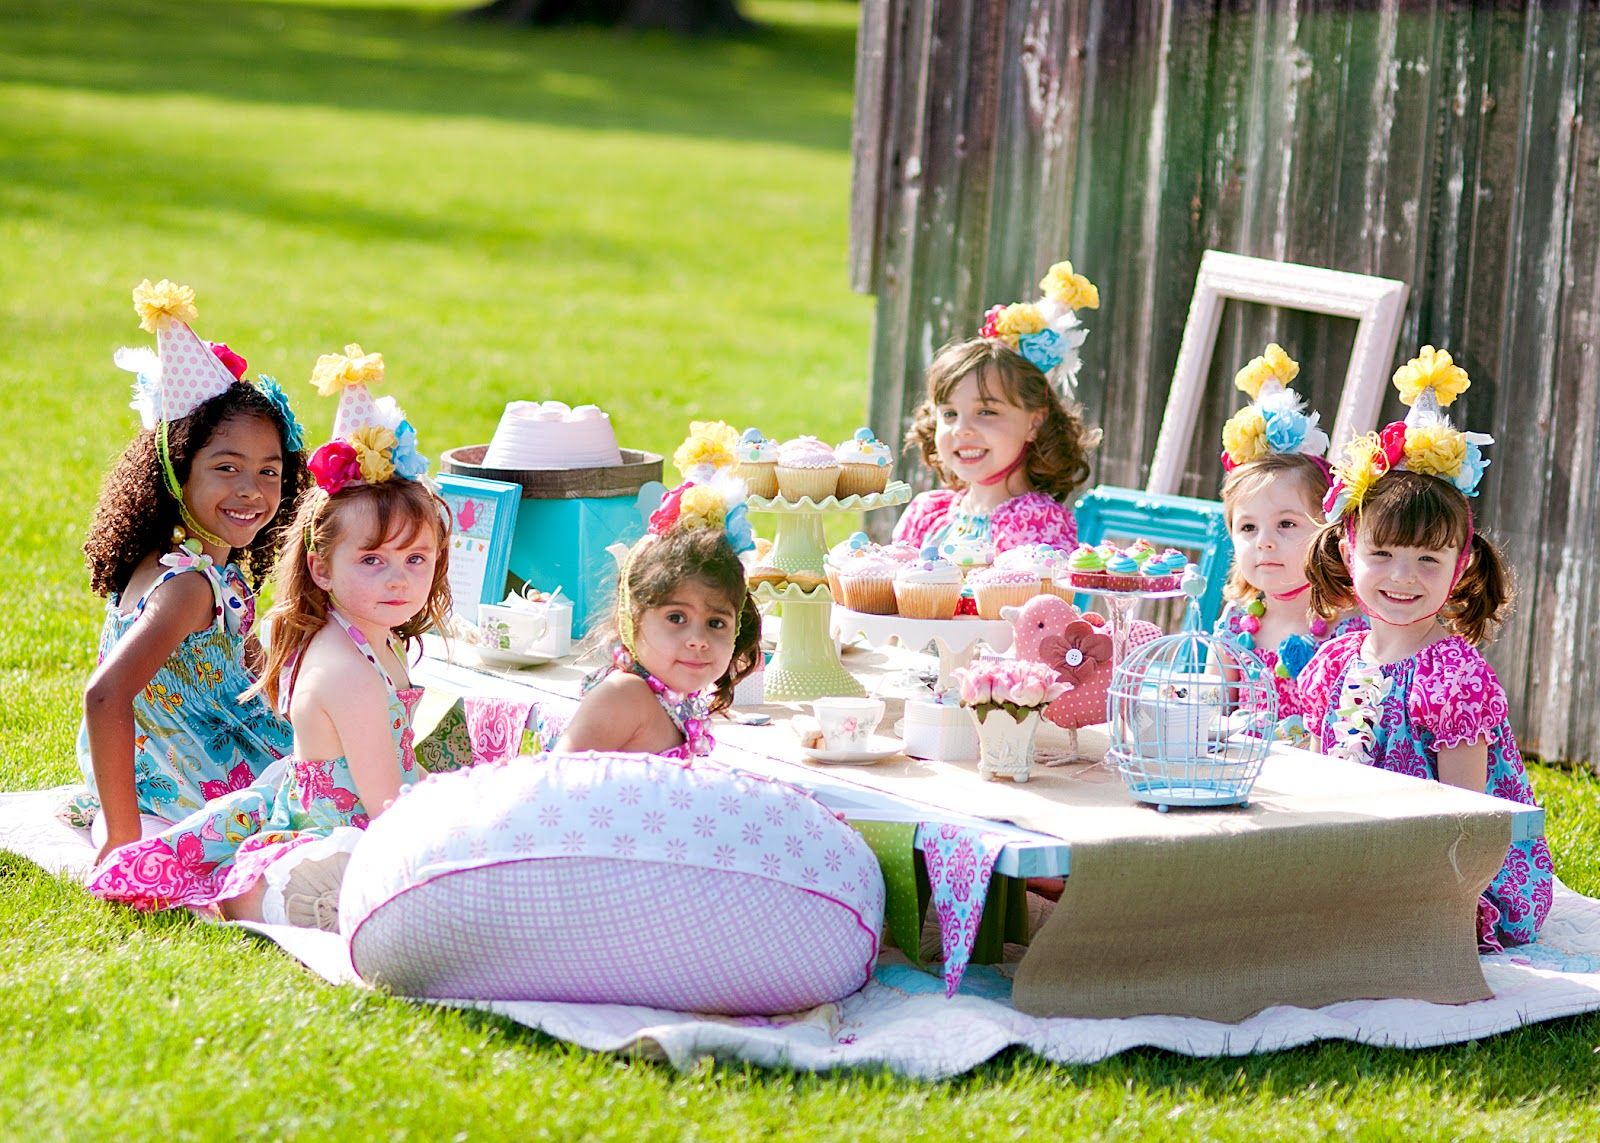 Tea Party Ideas For Little Girls Do you see that cute little -   Cute Ideas for little girls Tea Party